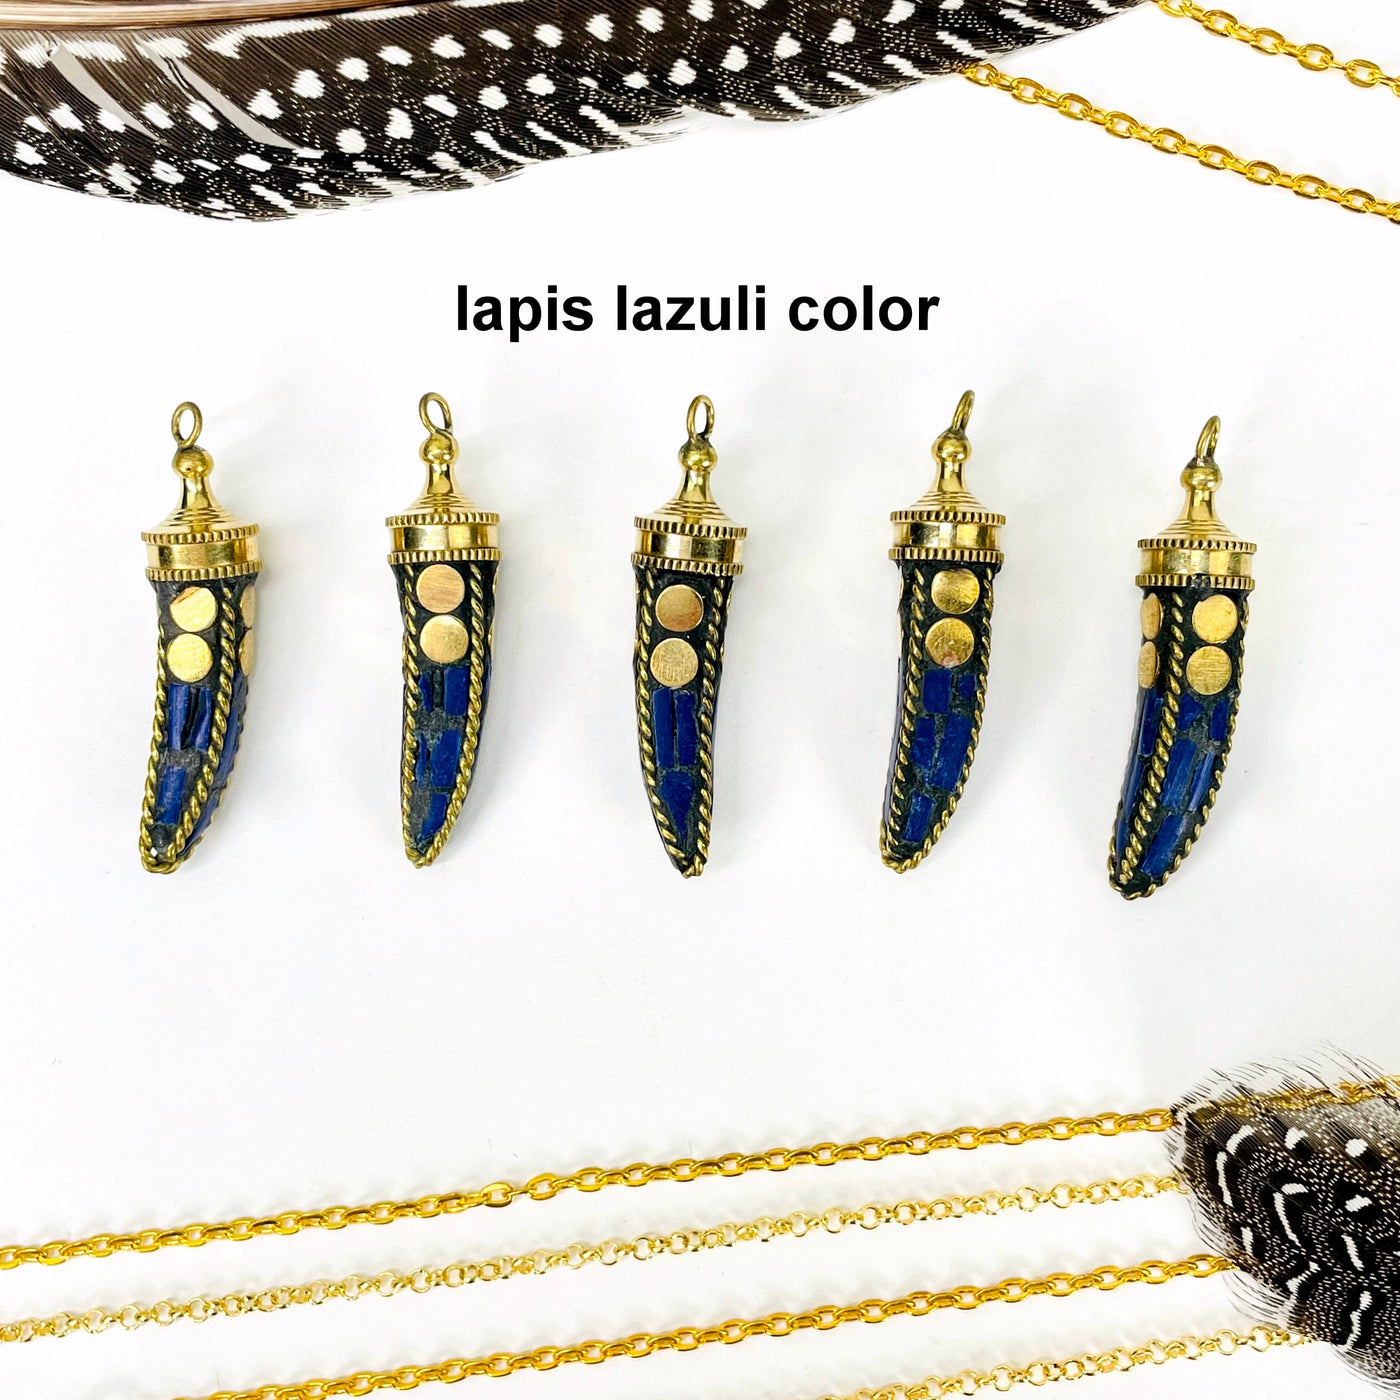 overhead view of five lapis lazuli color petite mosaic horn pendants in a row on white background with decorations for possible variations